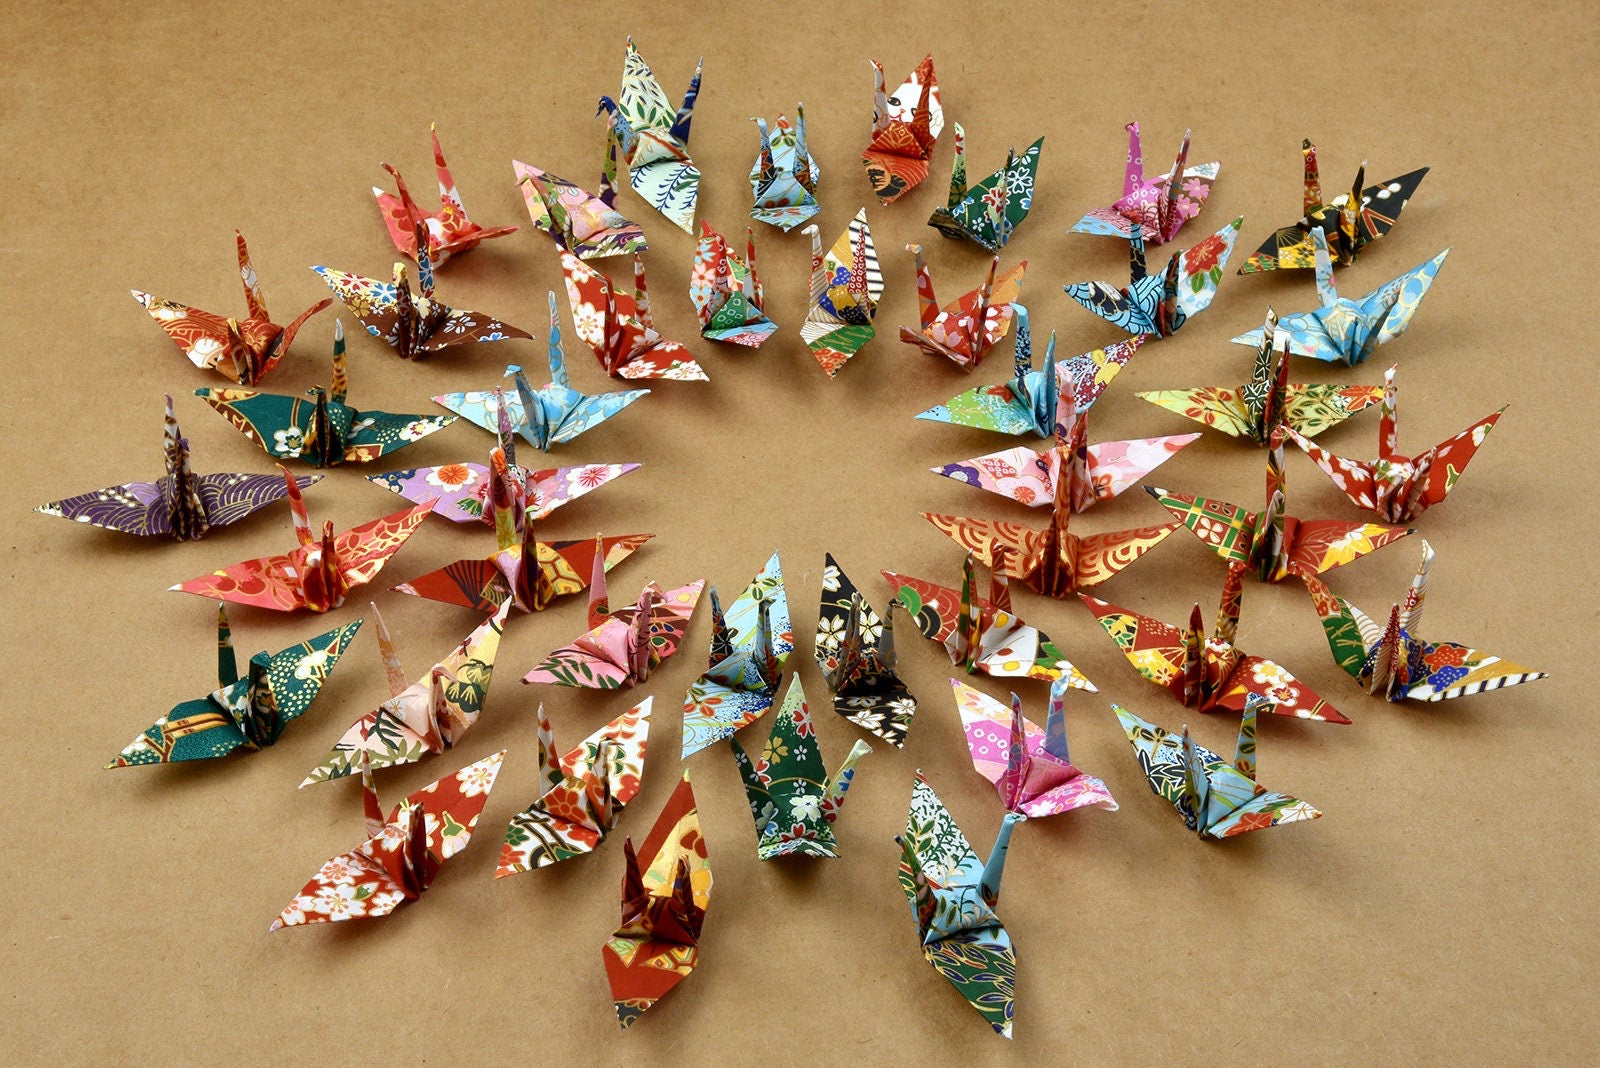 100 Origami paper crane Washi Paper Mixed patterns Origami crane Made of 3x3 inch Japanese Print Chiyogami Paper Art Ornament  Decoration